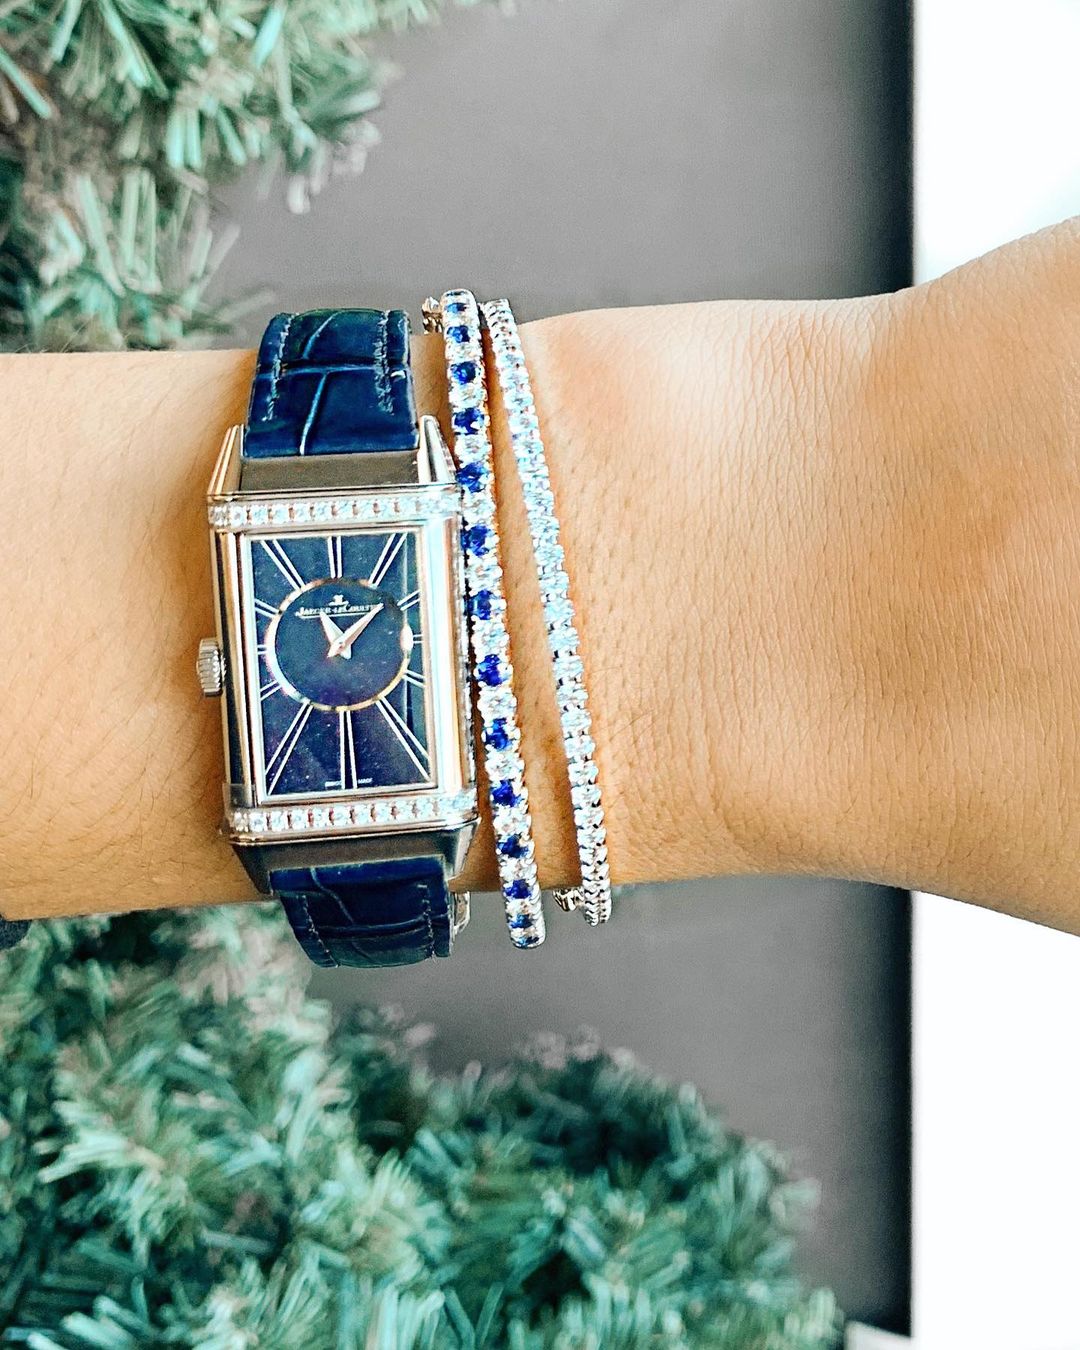 Jaeger-LeCoultre Watches in Philadelphia